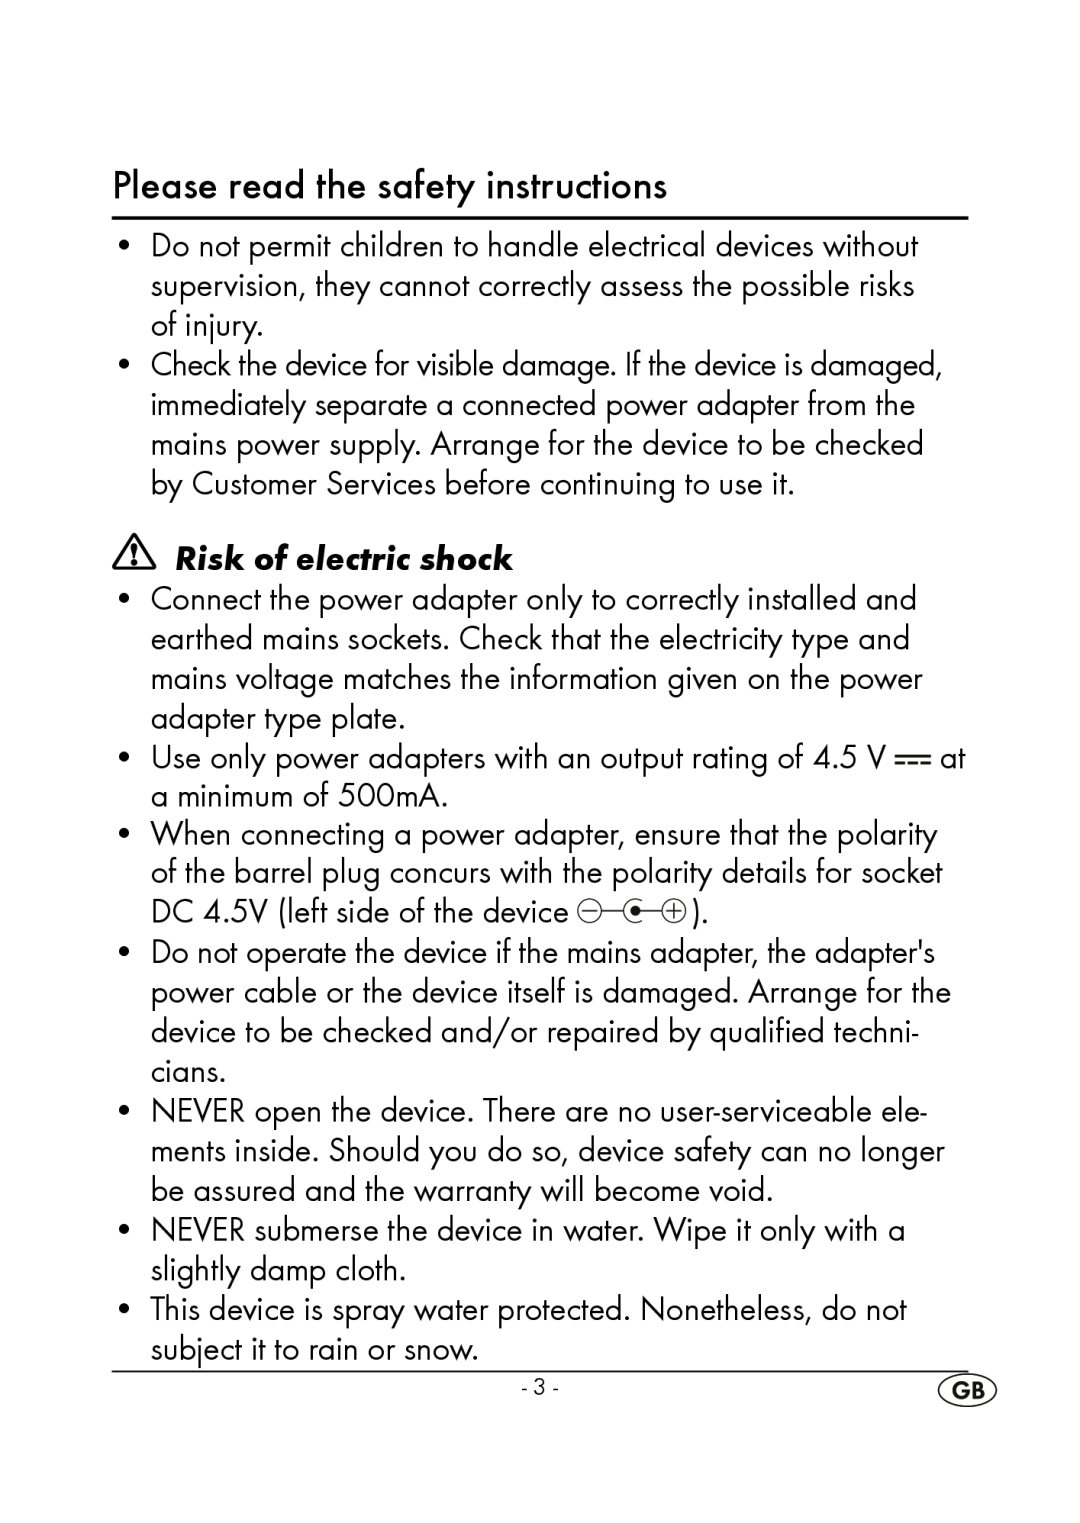 Silvercrest KH 245 manual Please read the safety instructions, Risk of electric shock 